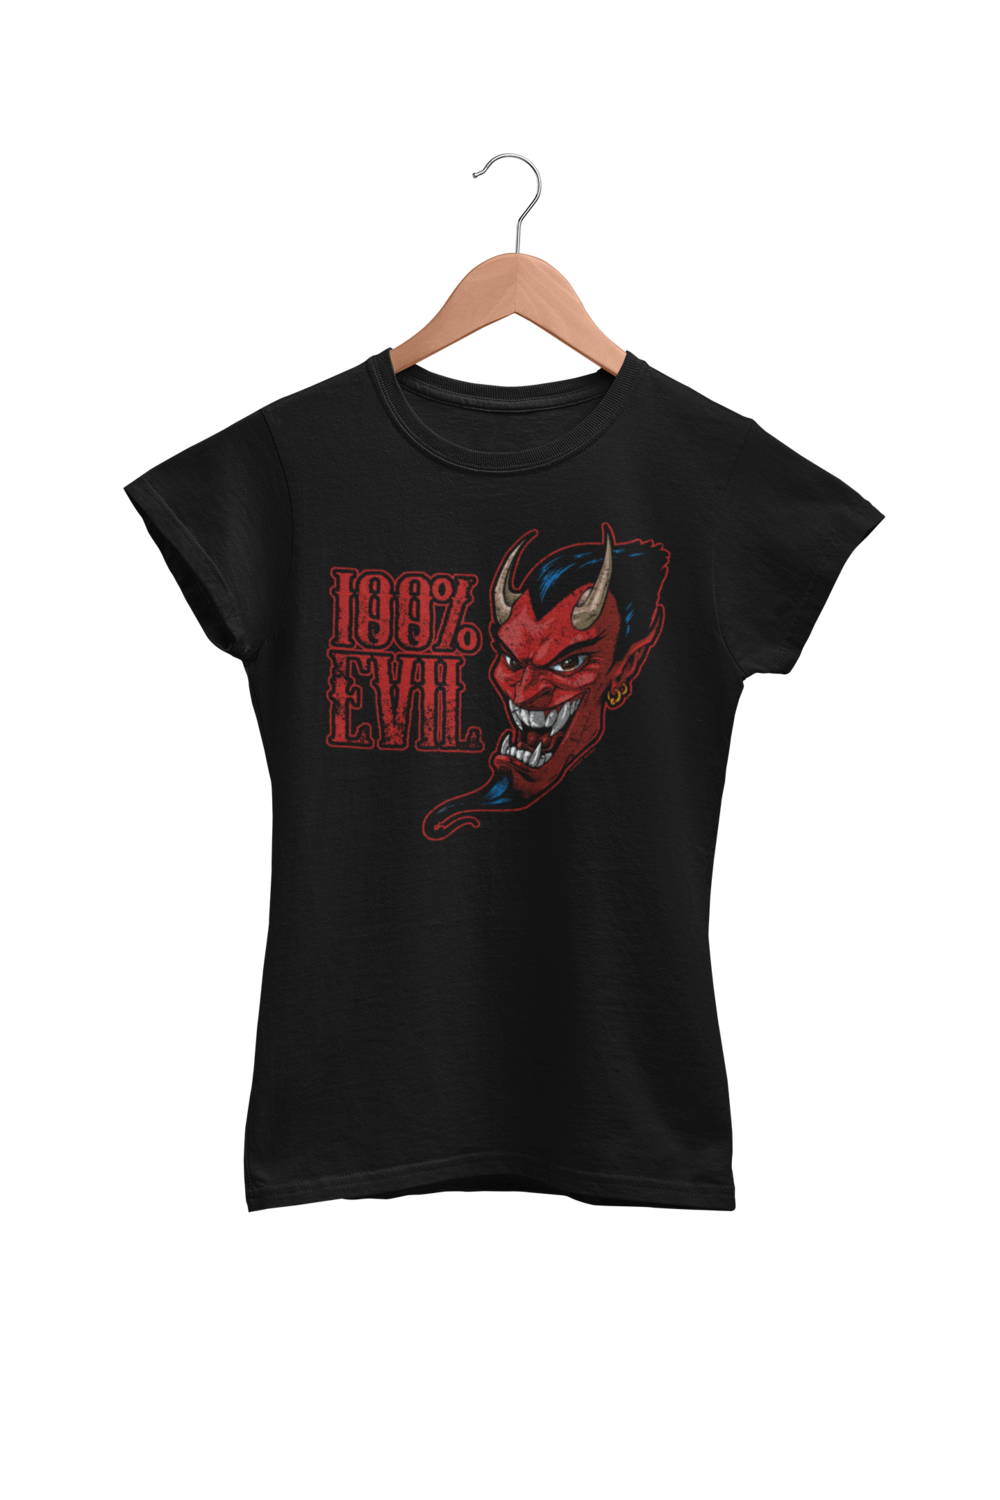 100 % EVIL T-SHIRT WOMAN BY JERRY MAGNI